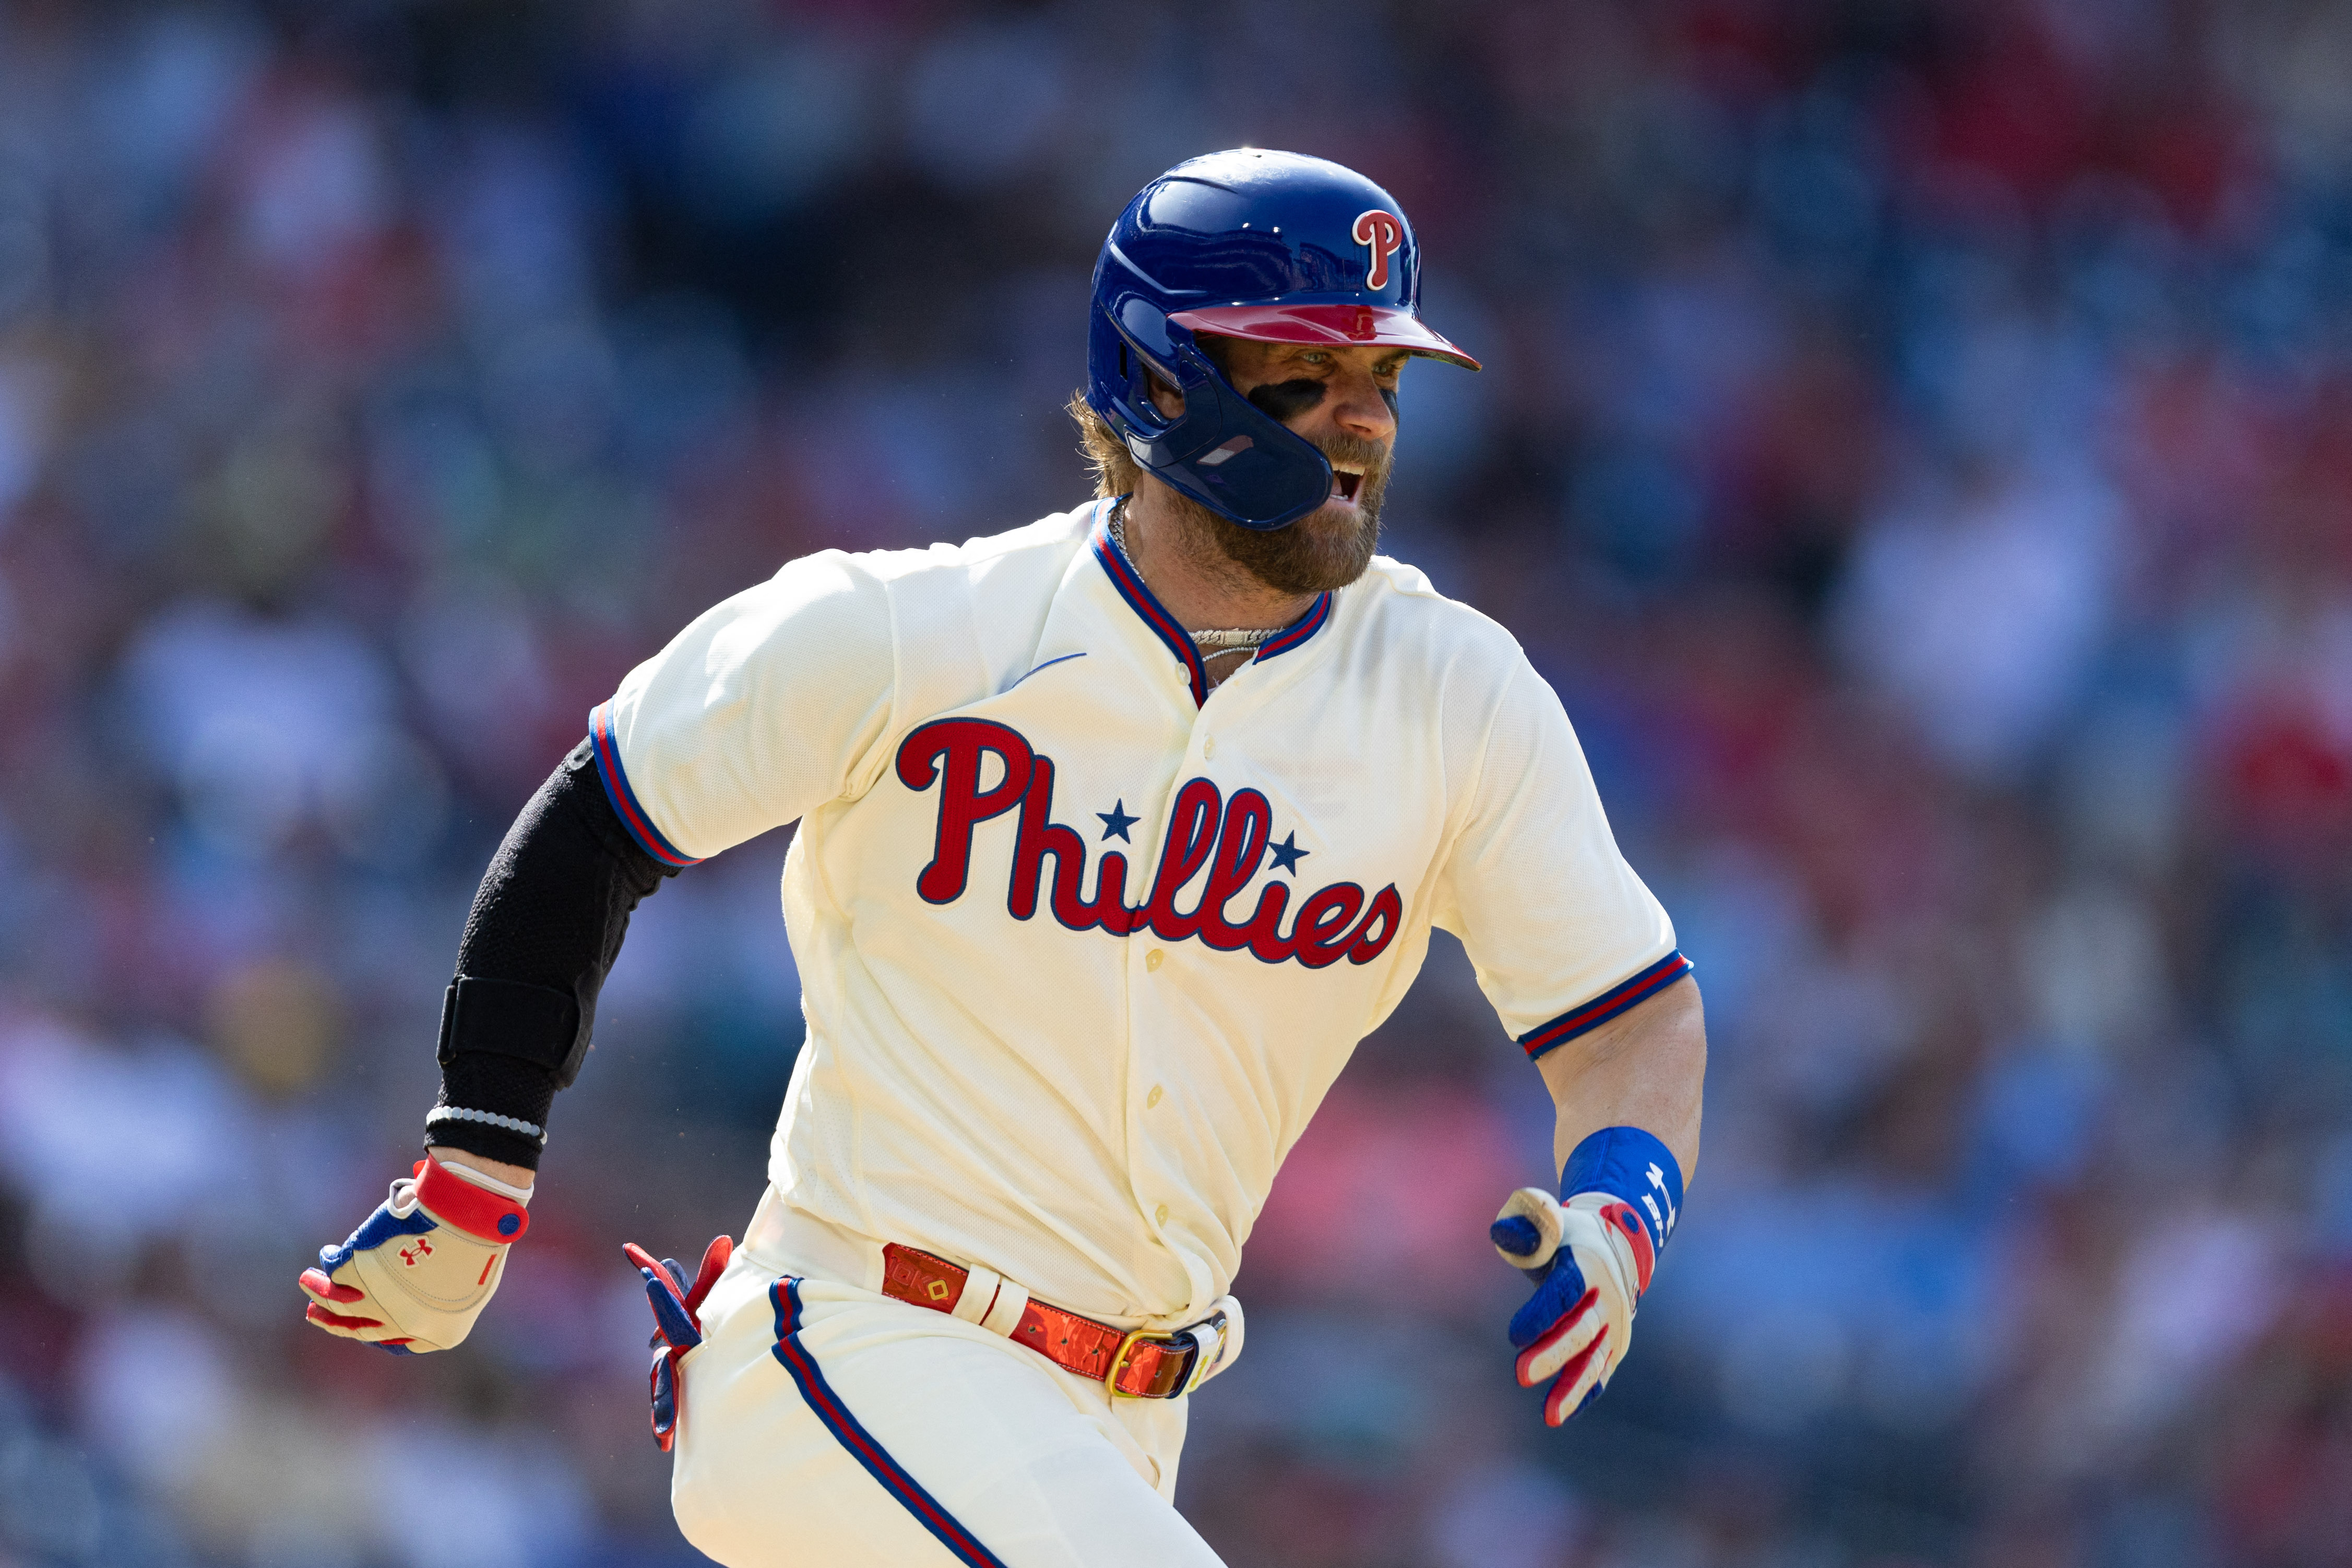 The Phillies walk off the Blue Jays in 10 innings after Bo Bichette sends a  nuke past Vlad Guerrero allowing Edmundo Sosa to score : r/baseball